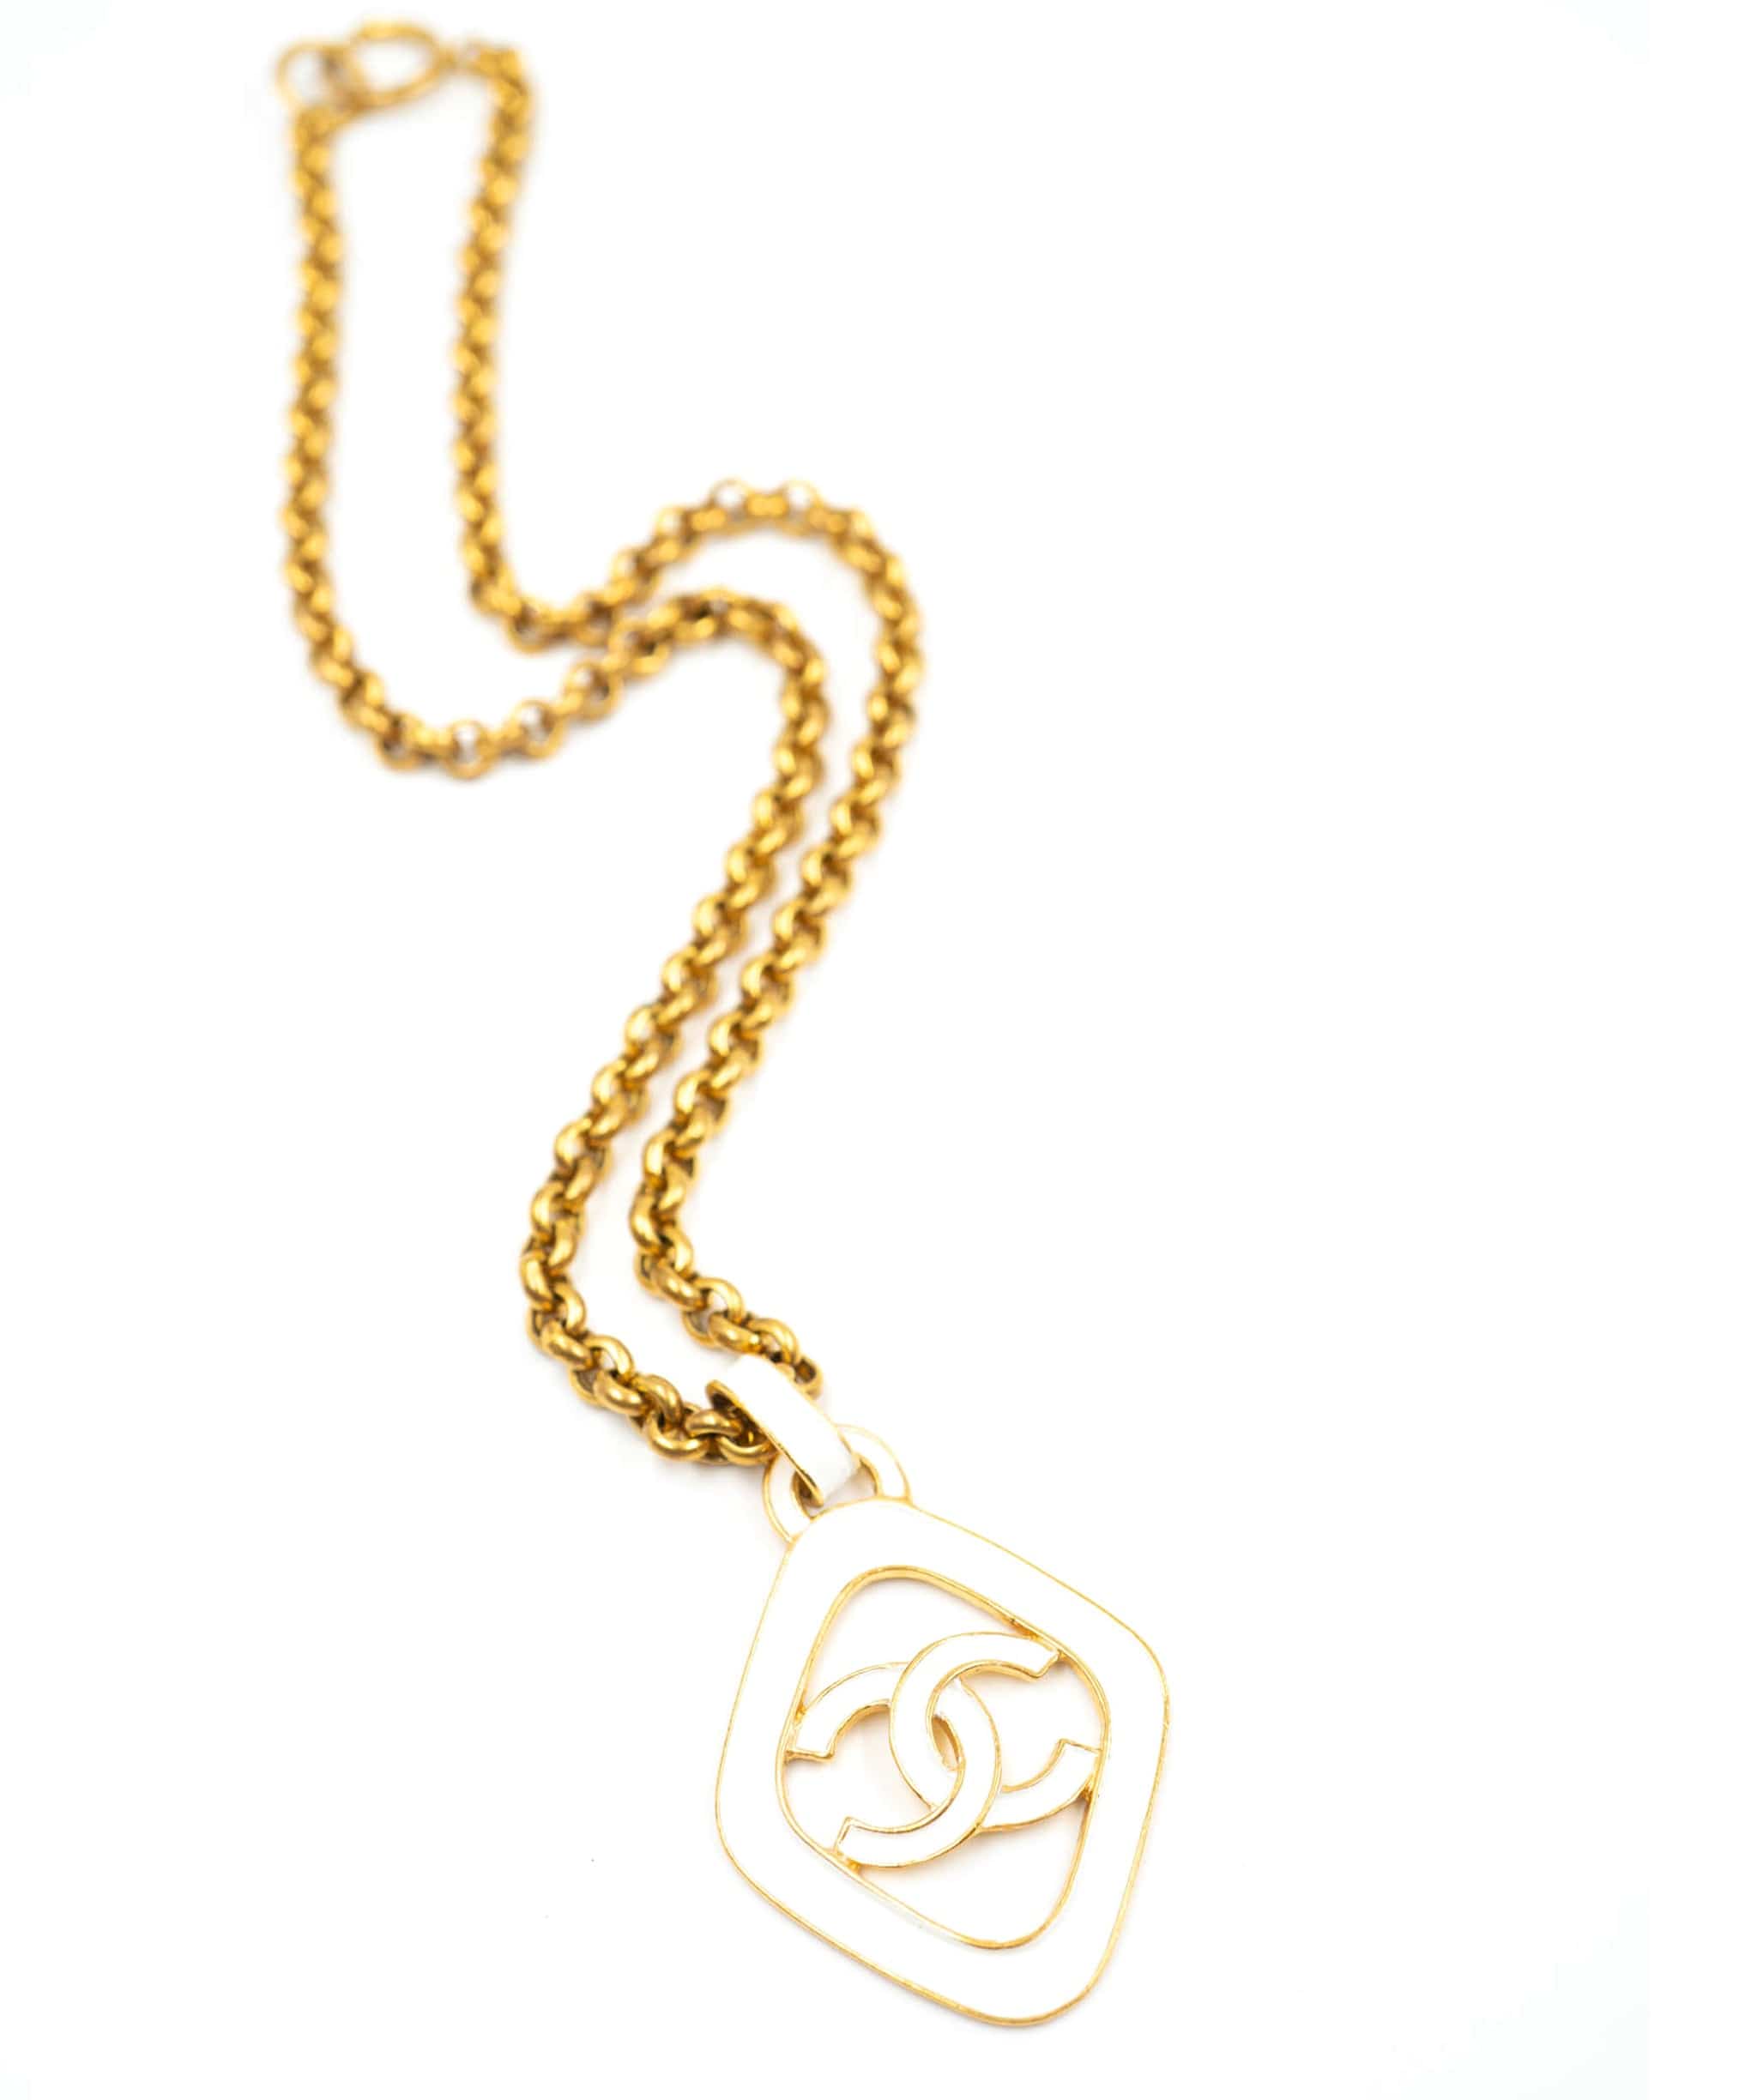 Chanel Vintage Chanel chain necklace with white enamel CC logo pendant, from 93 C - AGL2128